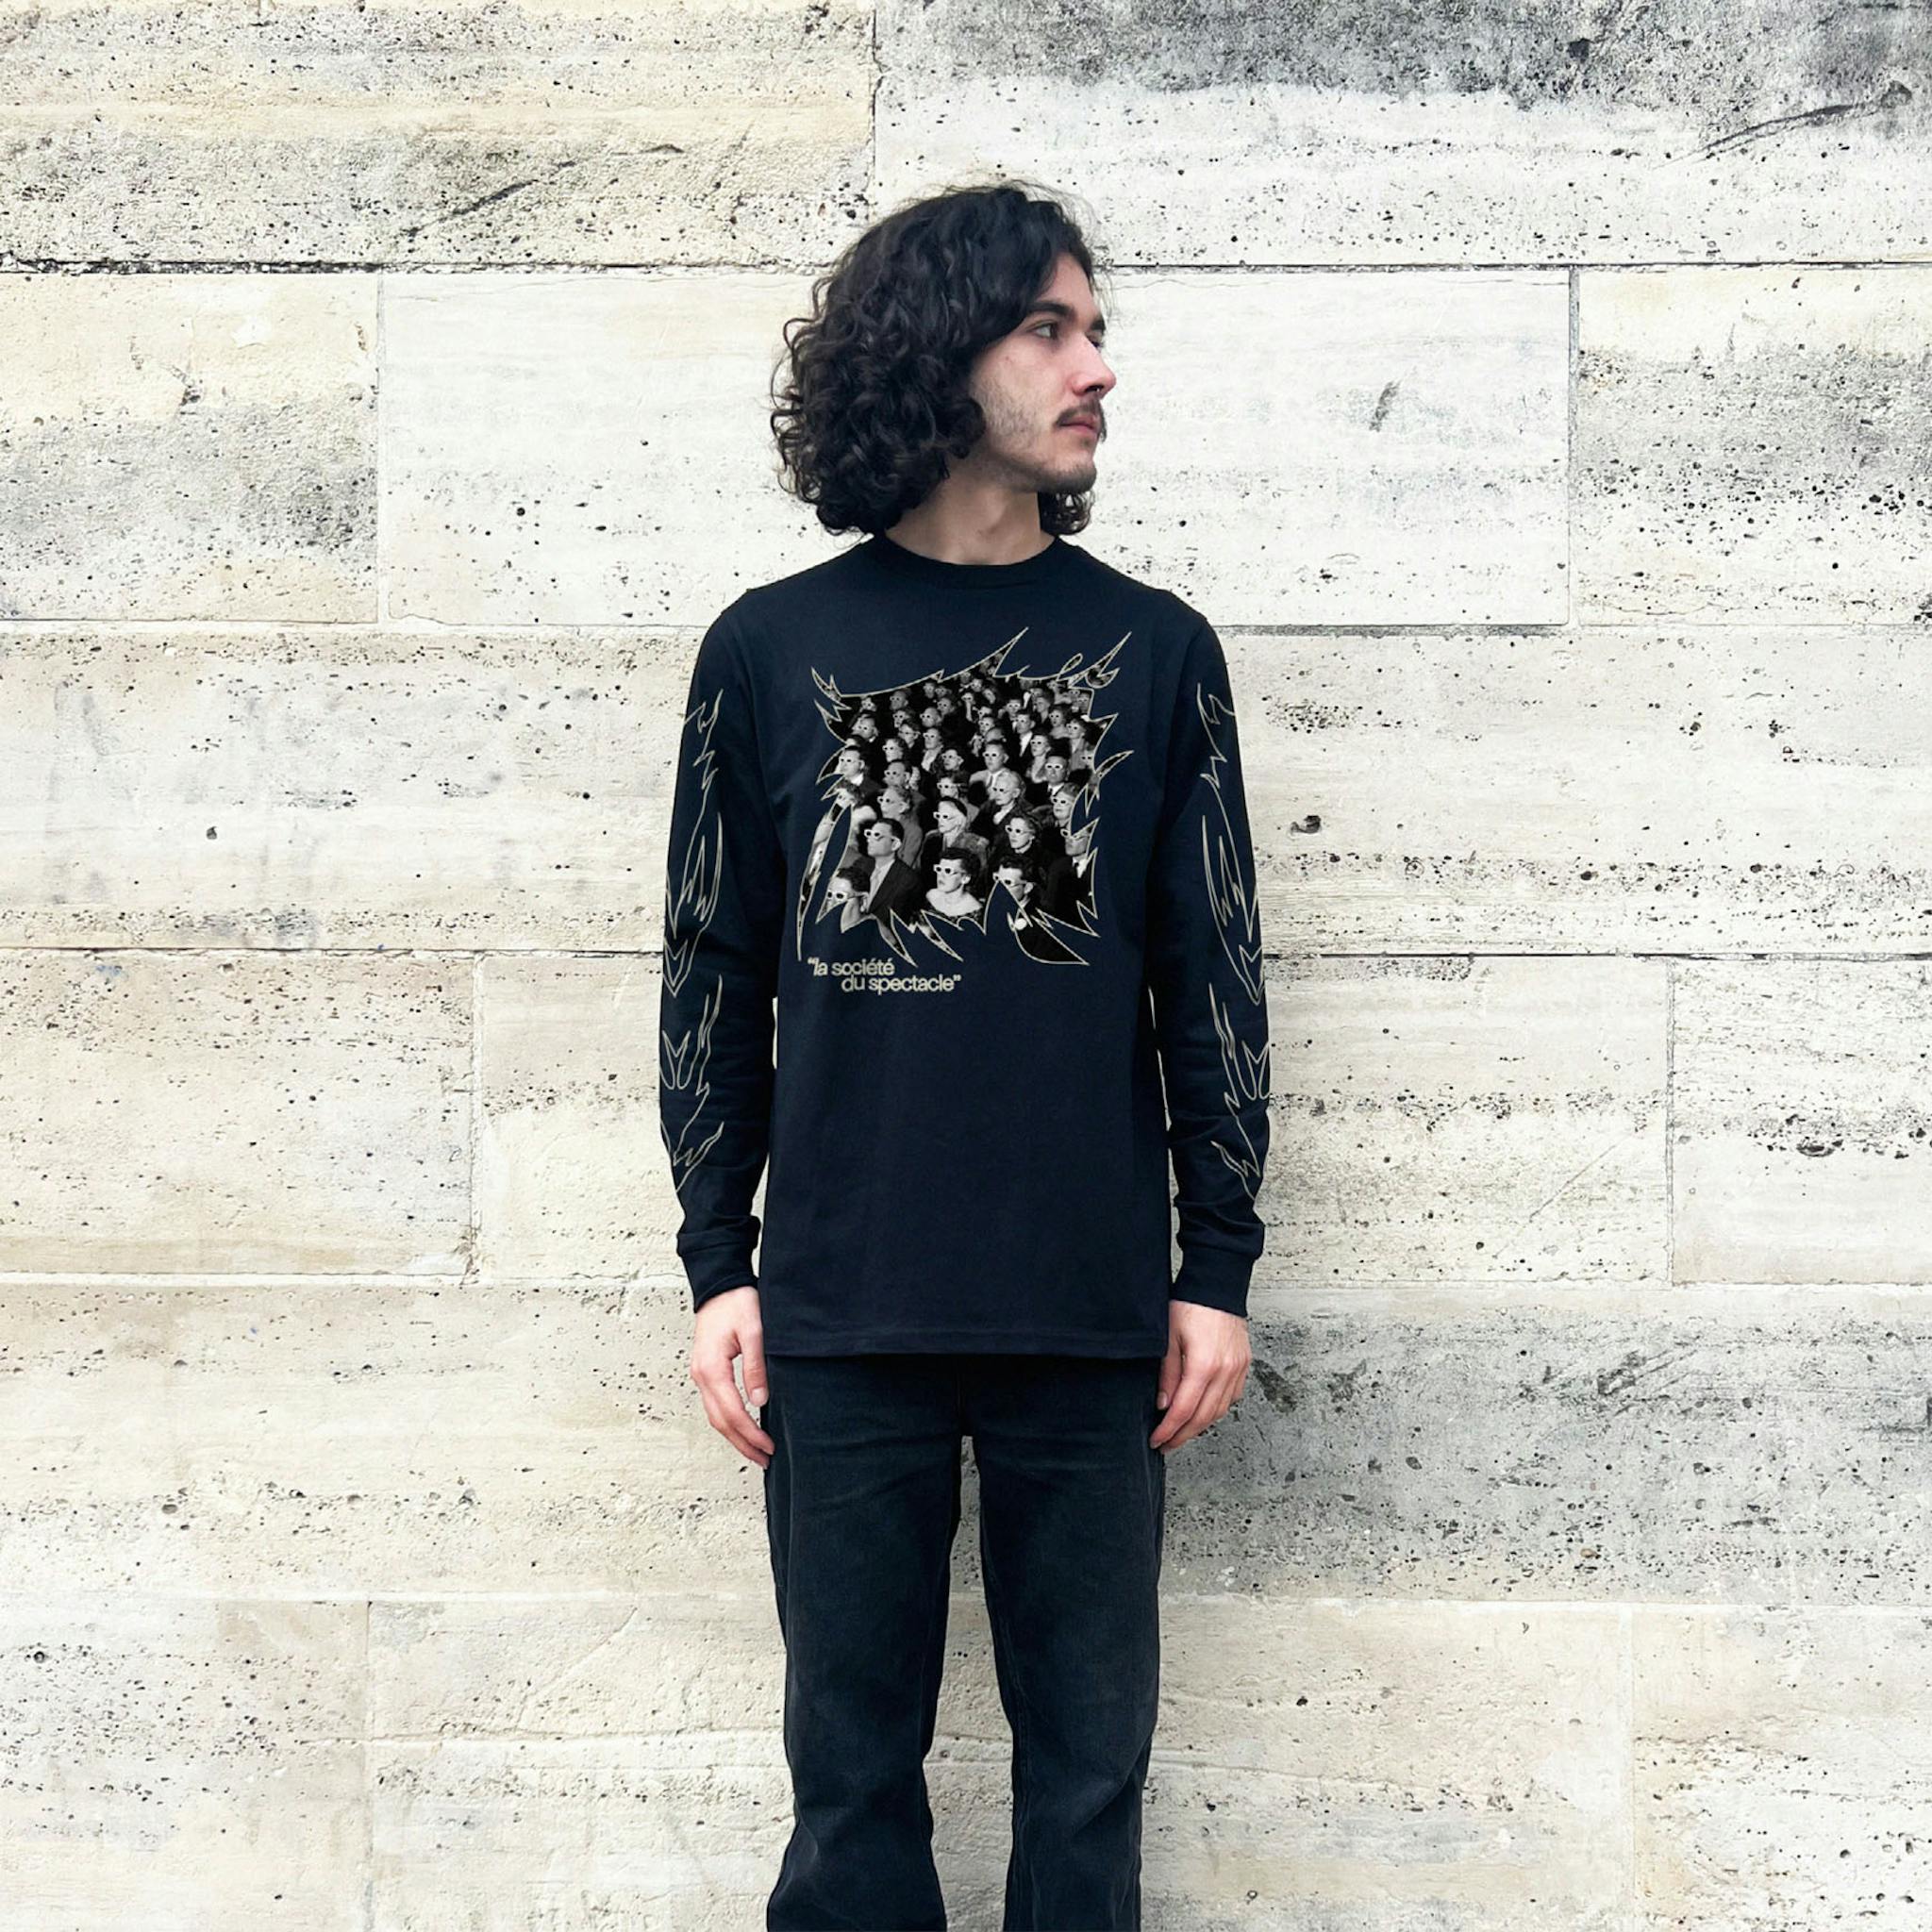 A man with long dark hair wearing a black long-sleeve T-shirt with a graphic of an audience with glasses and the text "la société du spectacle."